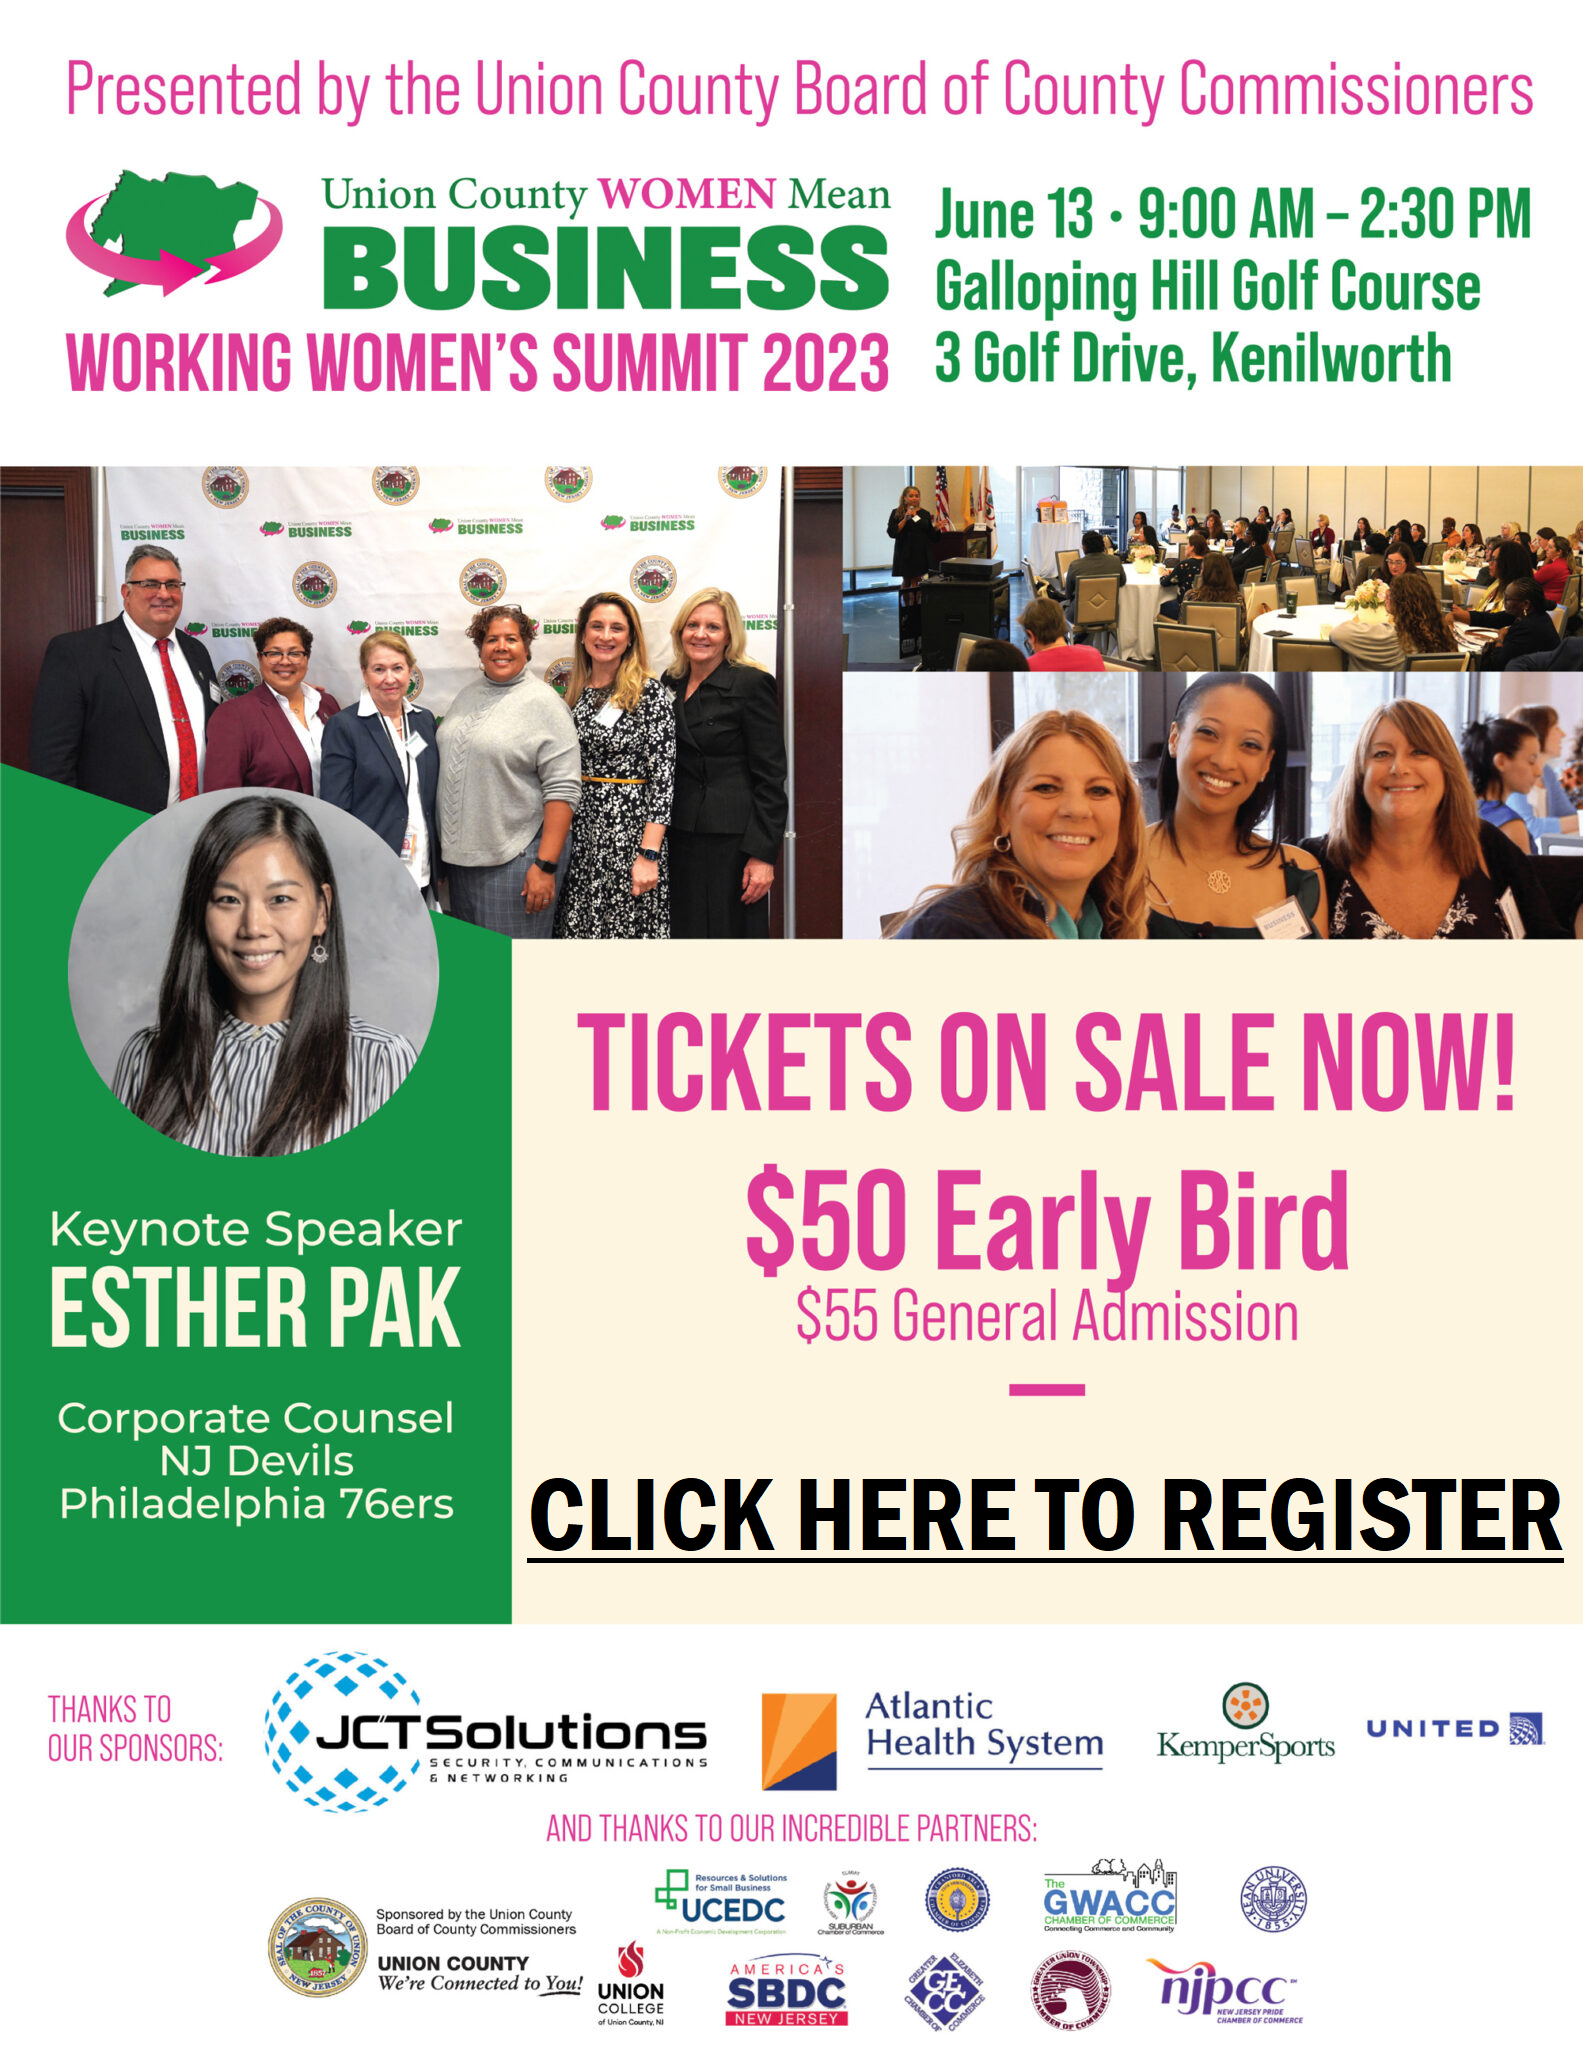 The Union County Women Mean Business Summit returns on June 13th